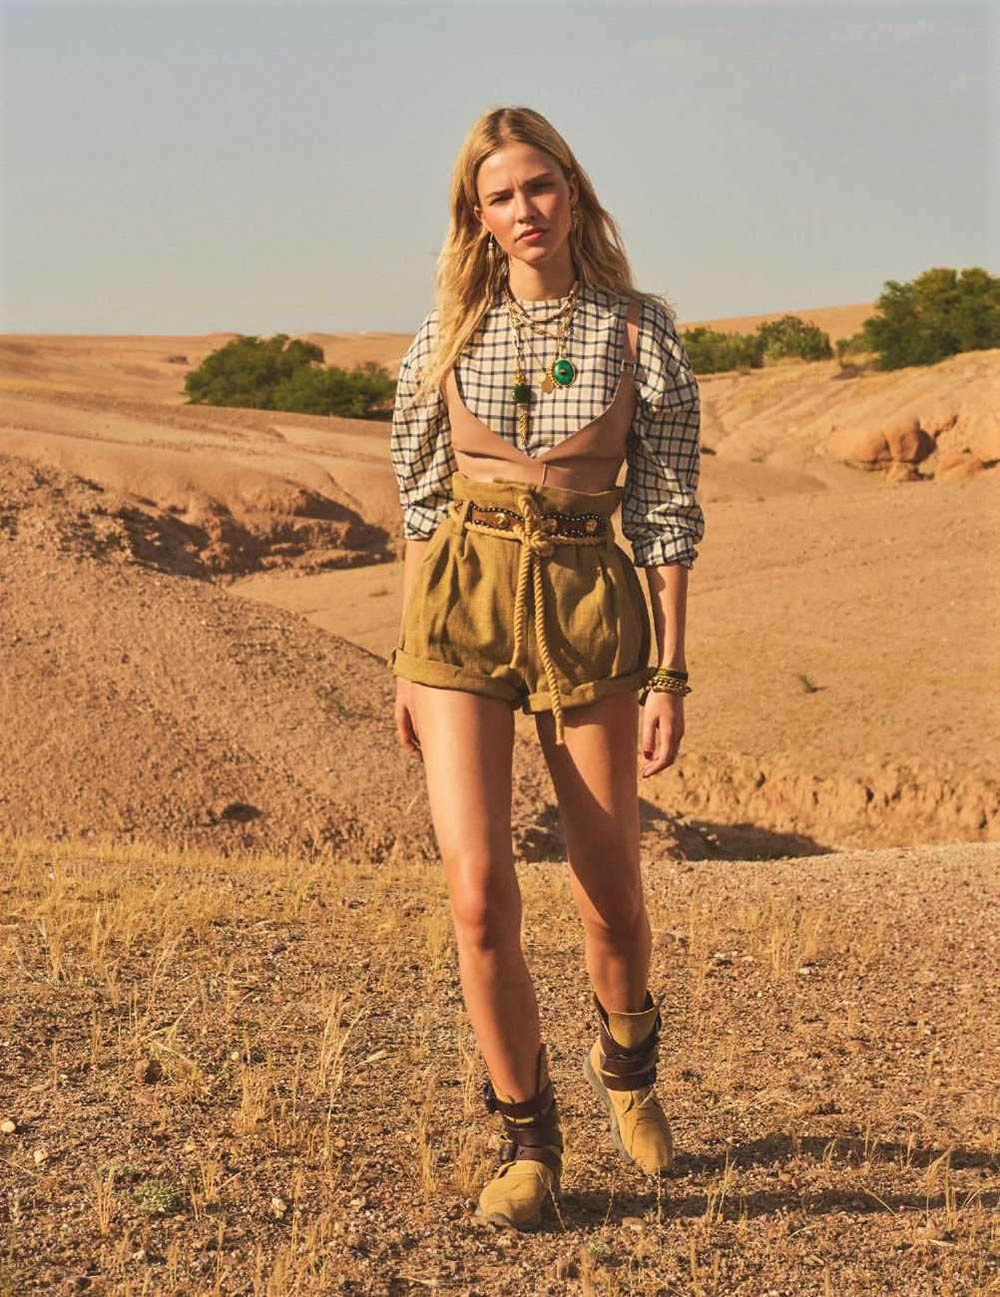 Sasha Luss Is Pure Desert Beauty In 'Mode Trotteuse' Lensed By Tuns ...